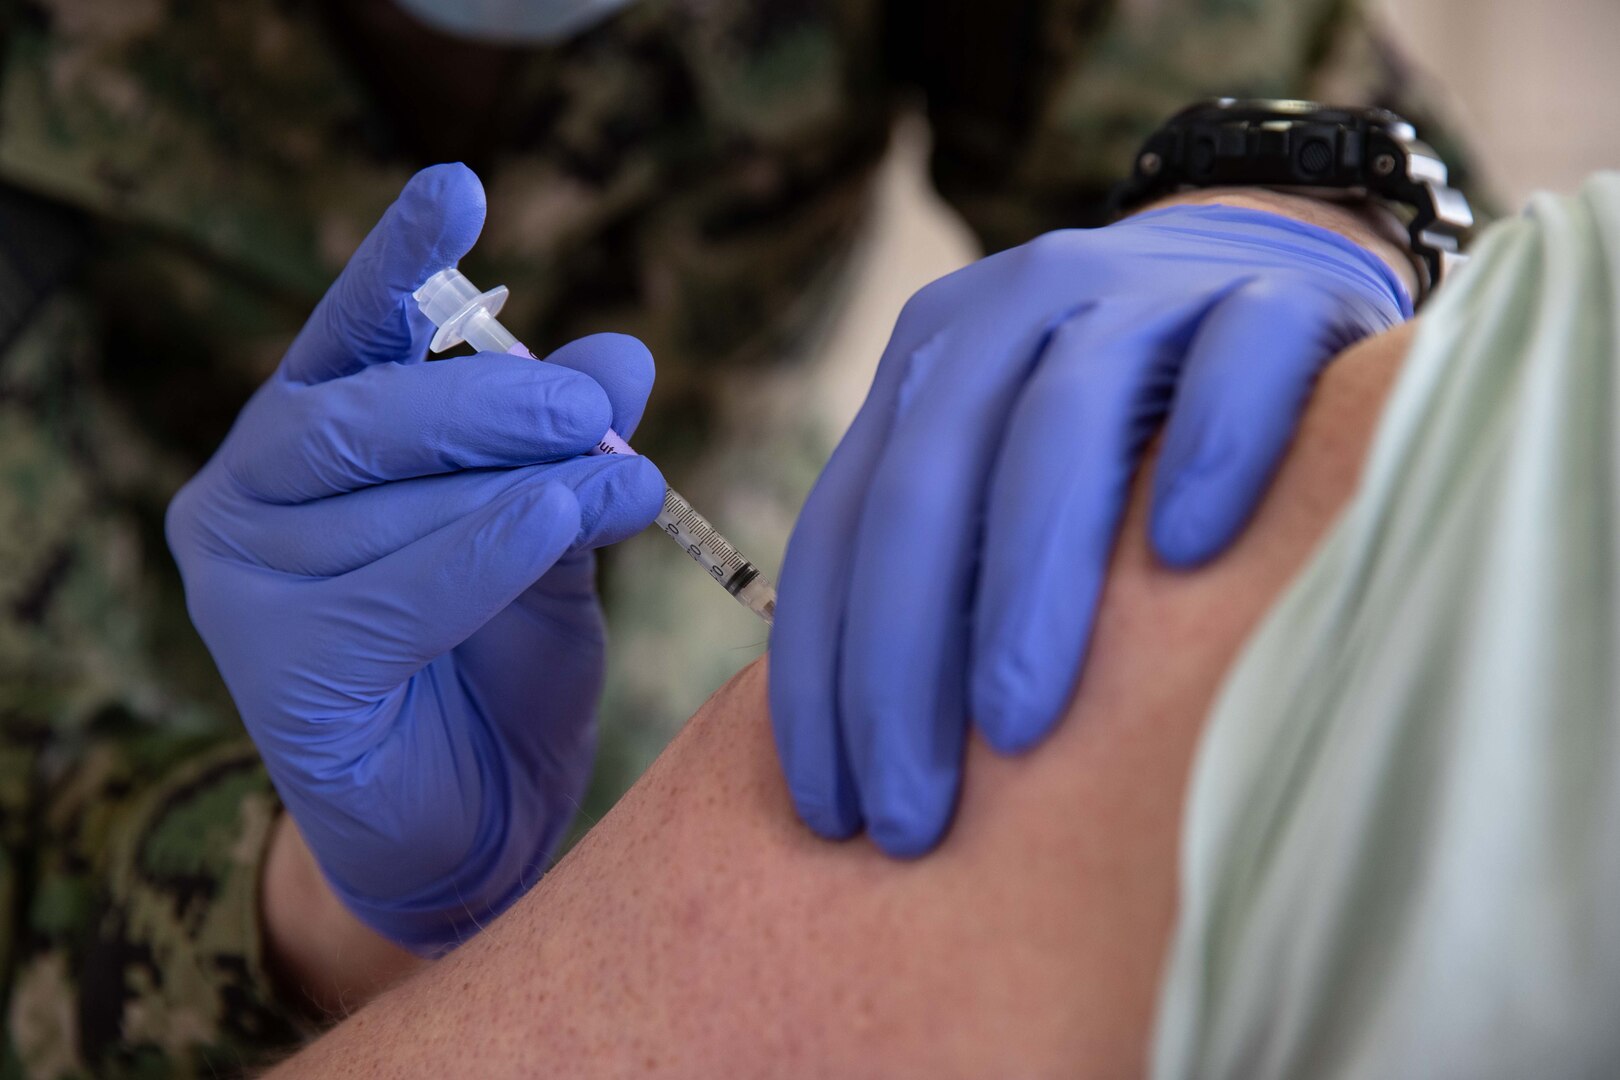 A service member administers an injection into someone's arm.